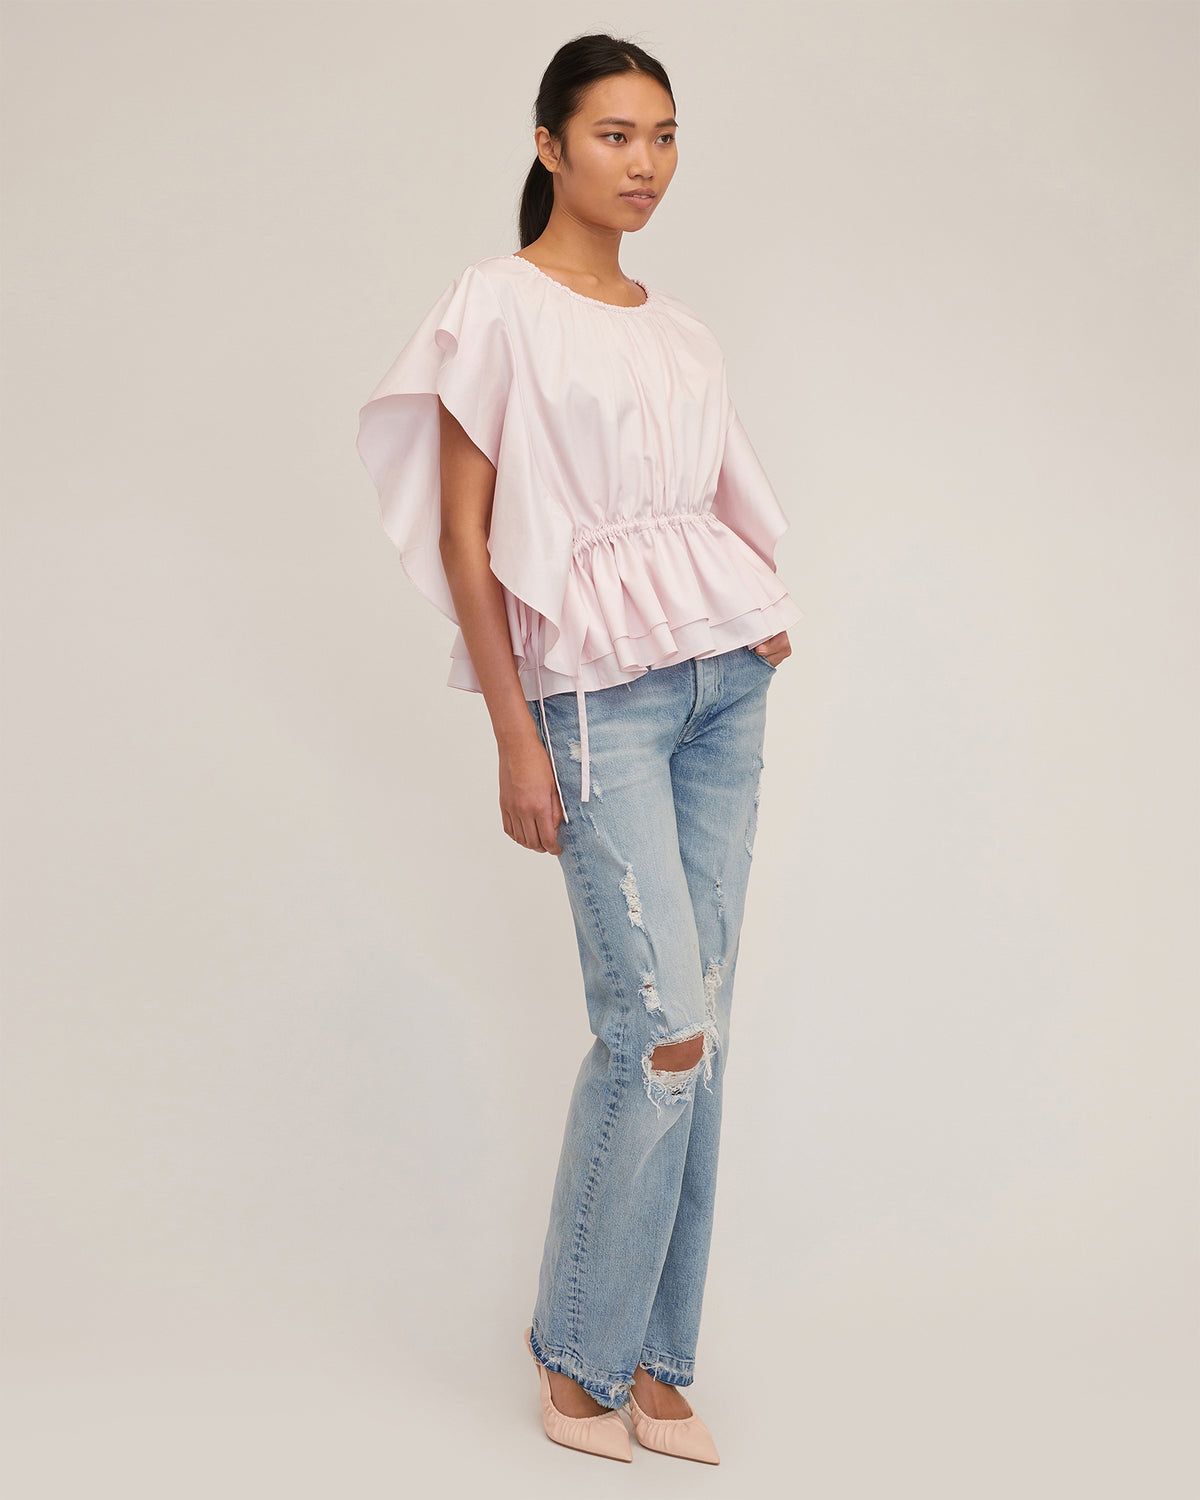 Lincoln Cotton Trapeze Top in Soft Pink | MARISSA WEBB